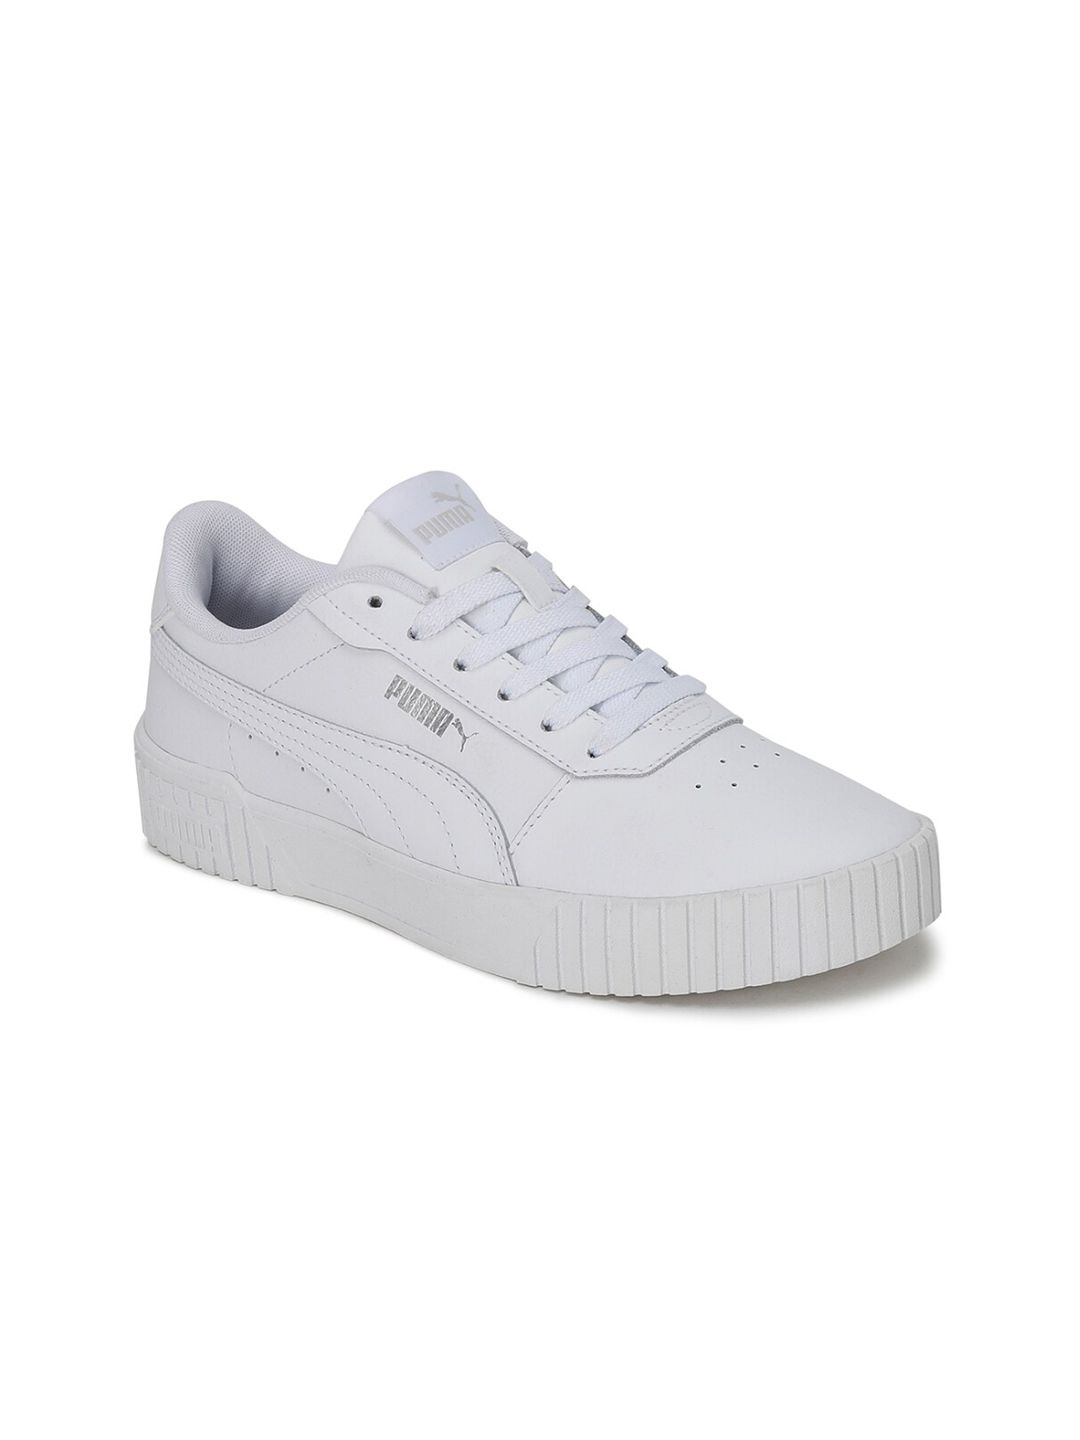 Puma Women White Solid Sneakers Price in India